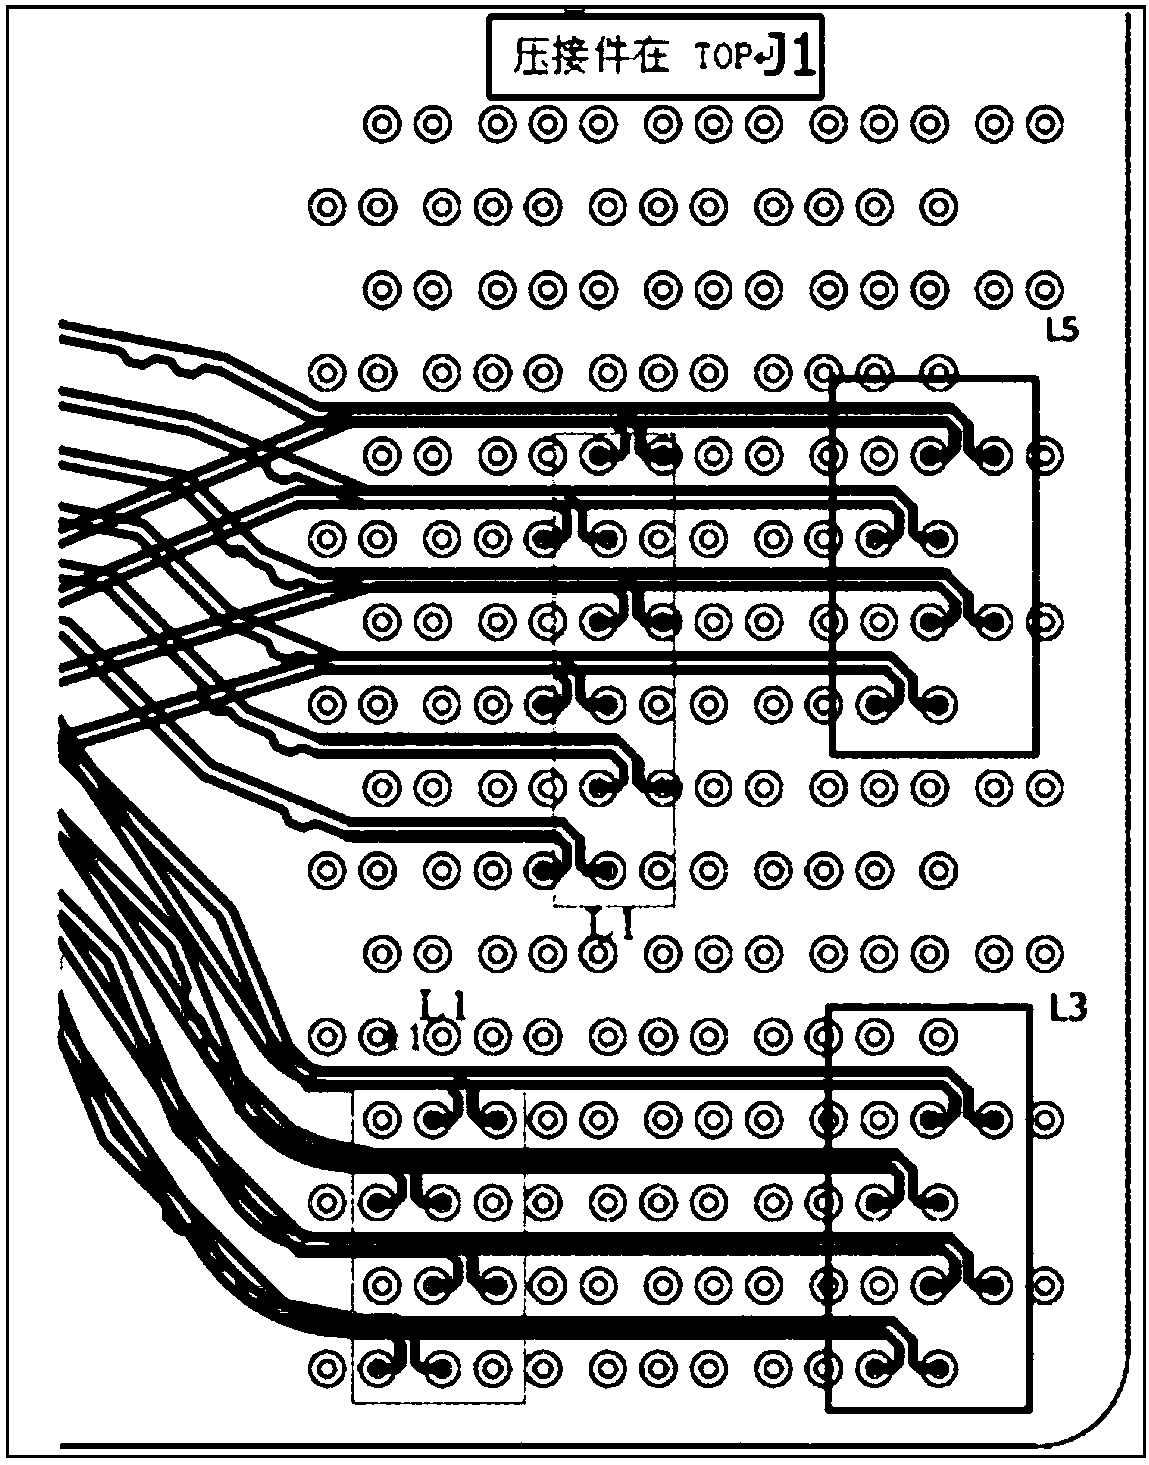 Generation method and system for pressure welding element backdrill via hole file on the basis of Cadence Skill